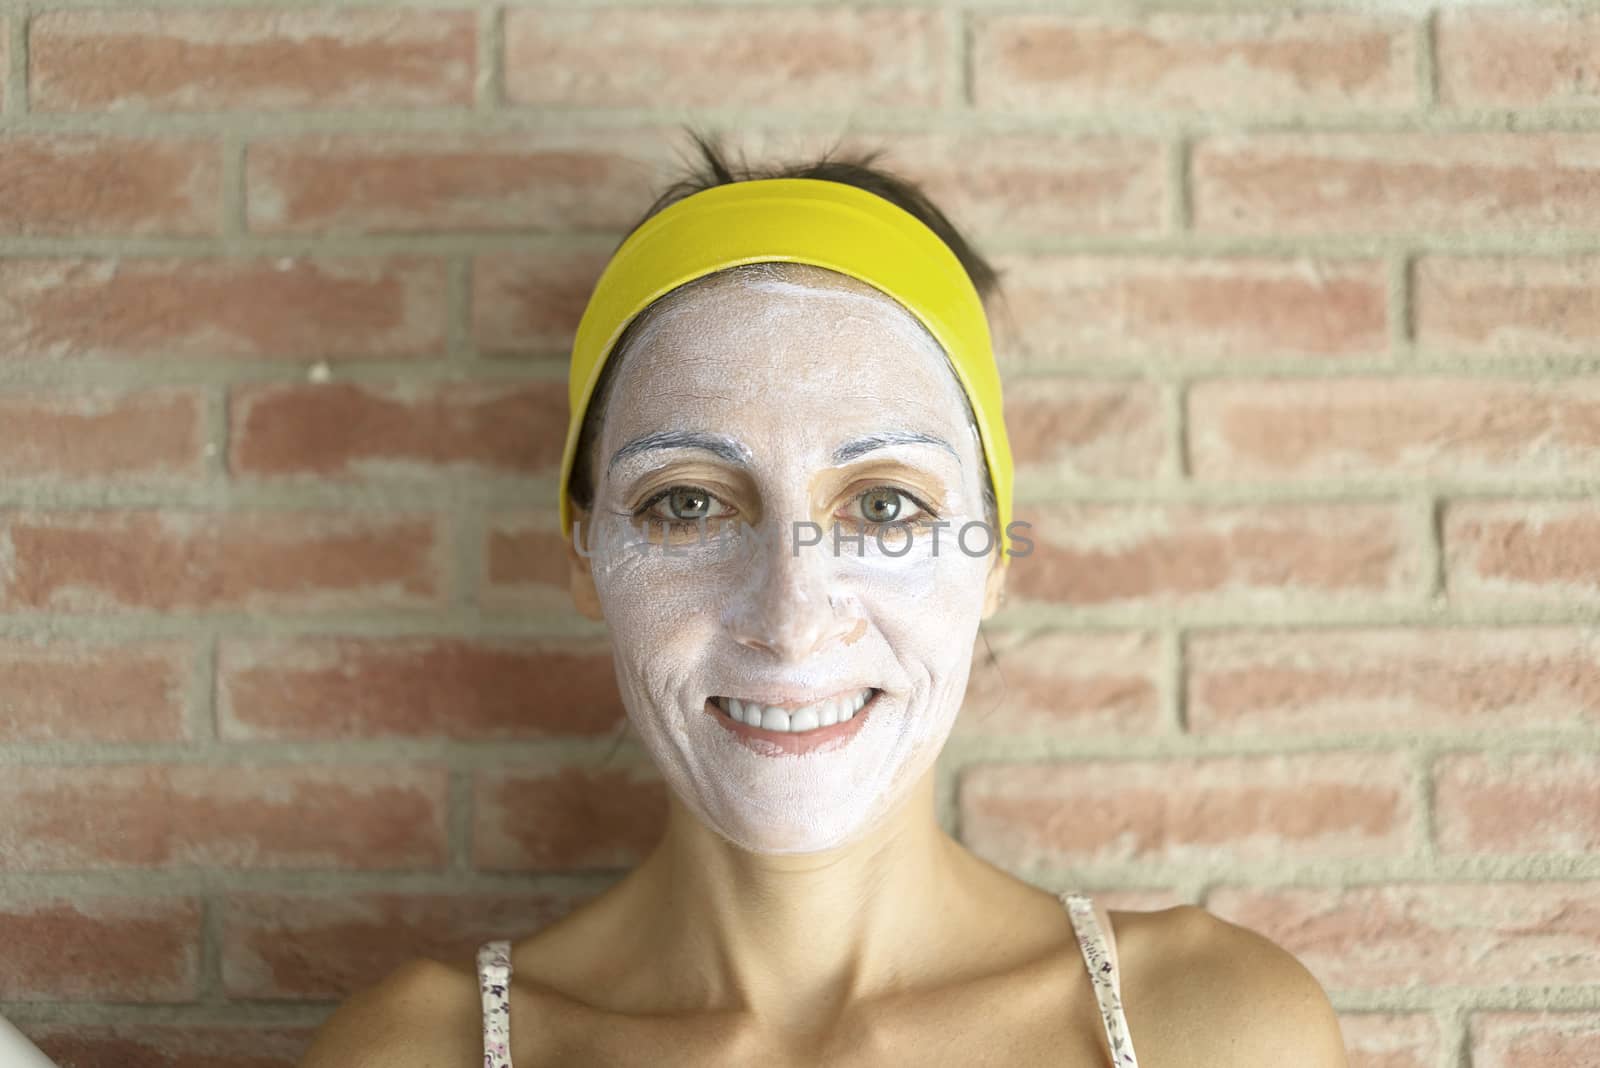 Relaxed woman applies mineral clay mask on face for rejuvenation, has headband on head